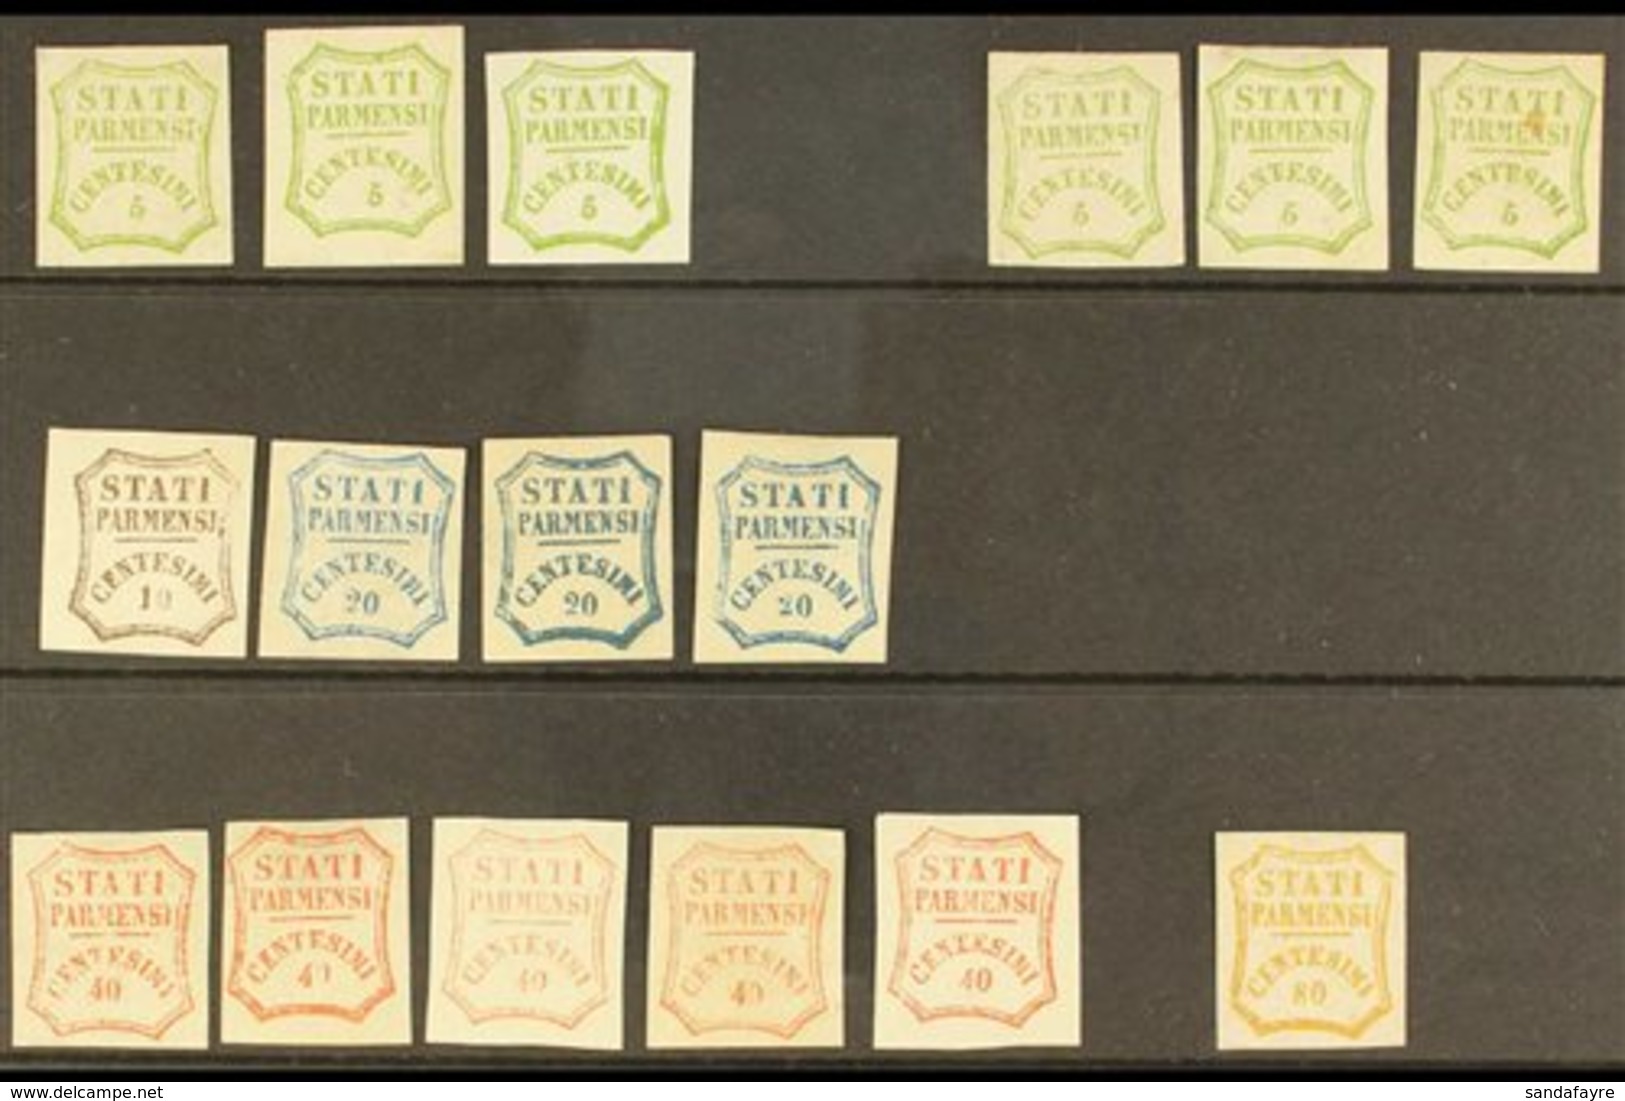 PARMA  1859 Provisional Government Issues Range, Sass 12 - 18, With 5c Yellow Green Mint (3), Mint No Gum (3), Then Mint - Unclassified